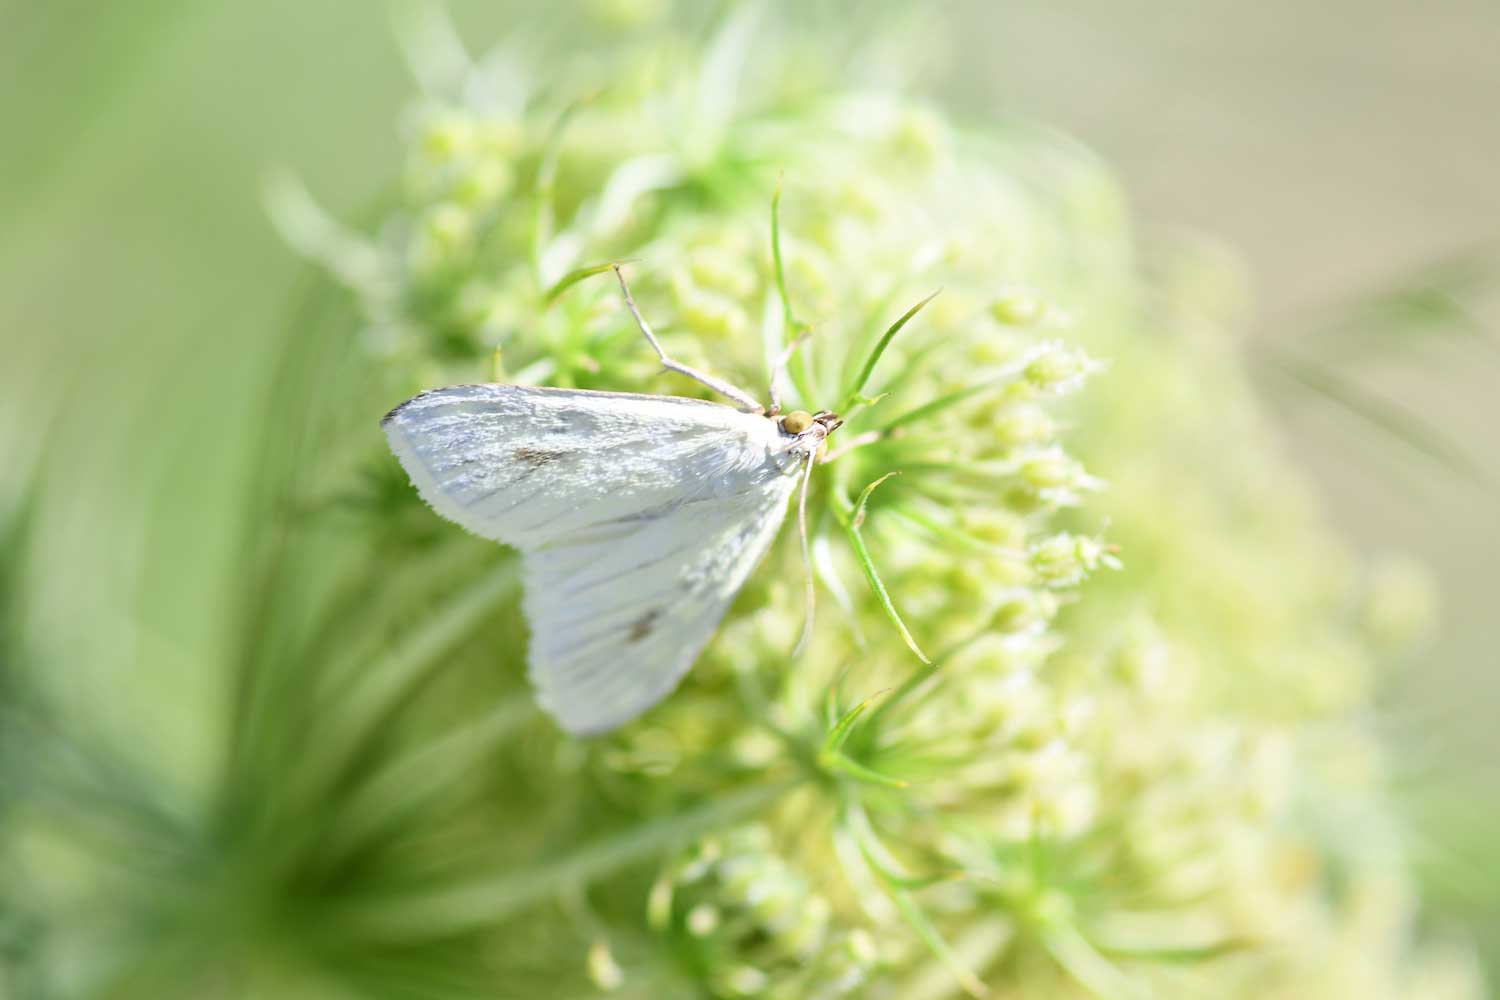 A white moth atop a green plant bloom.